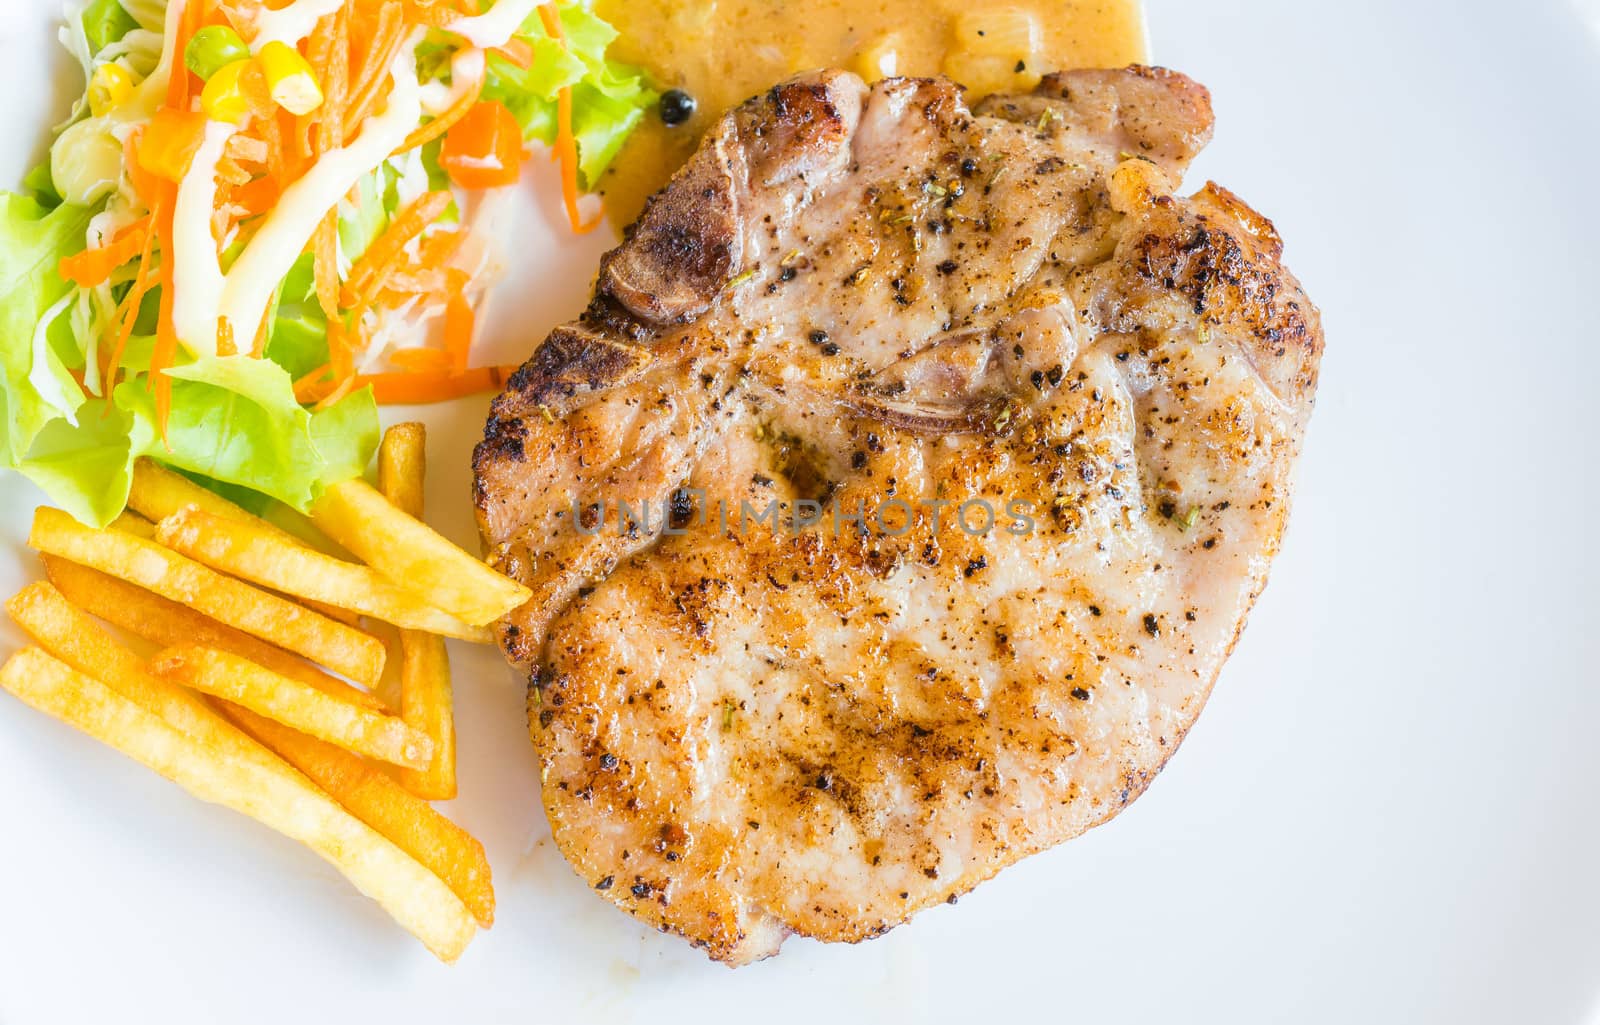 pork steak on white dish with salad and french fries by moggara12